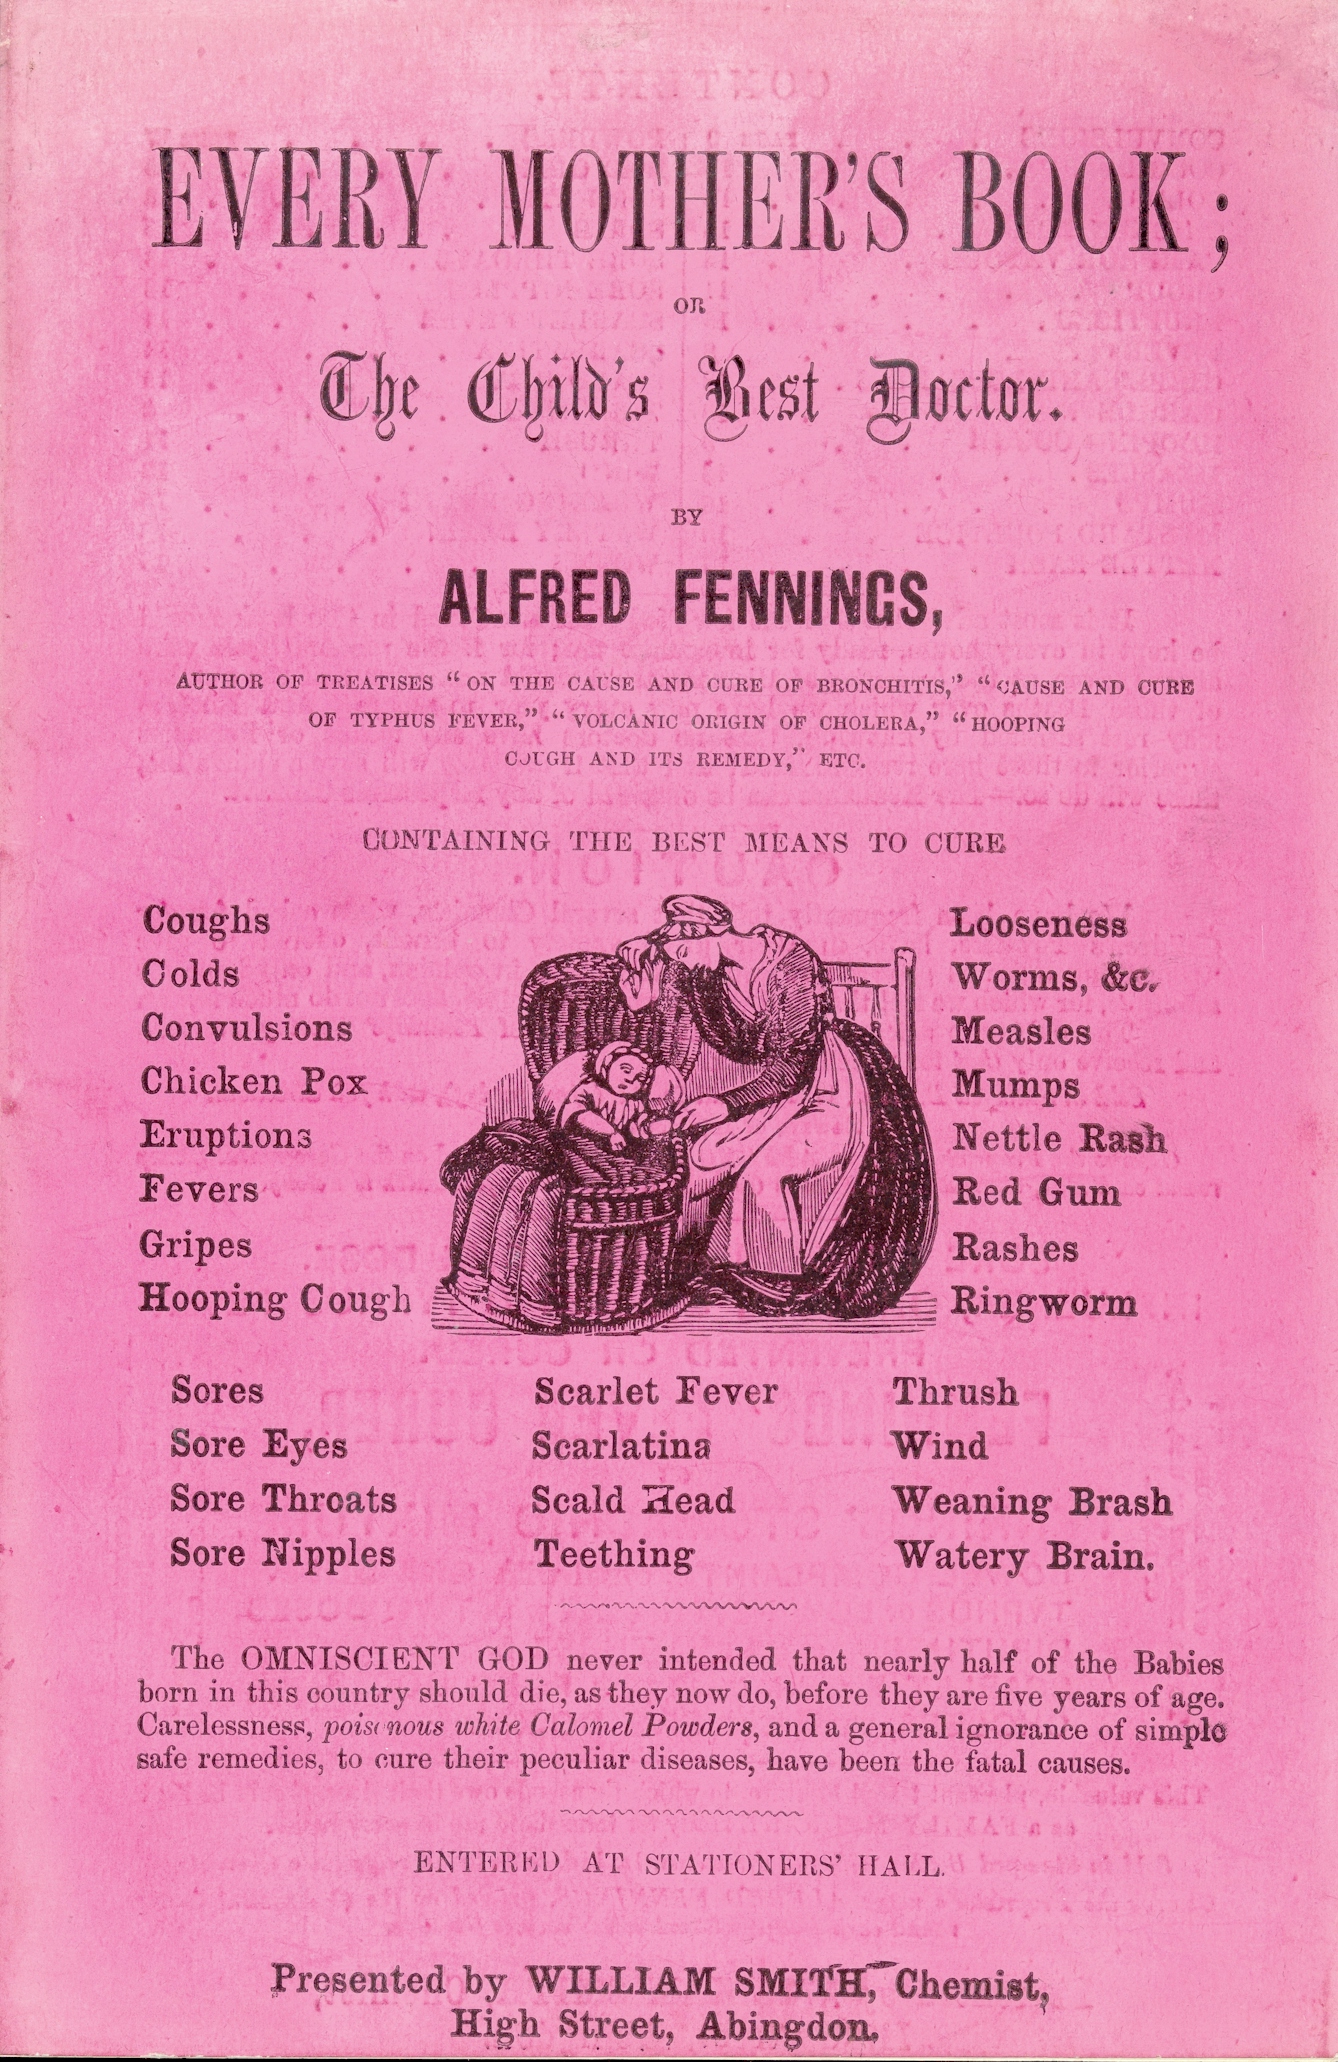 Title page for Every Mother's Book by Alfred Fennings